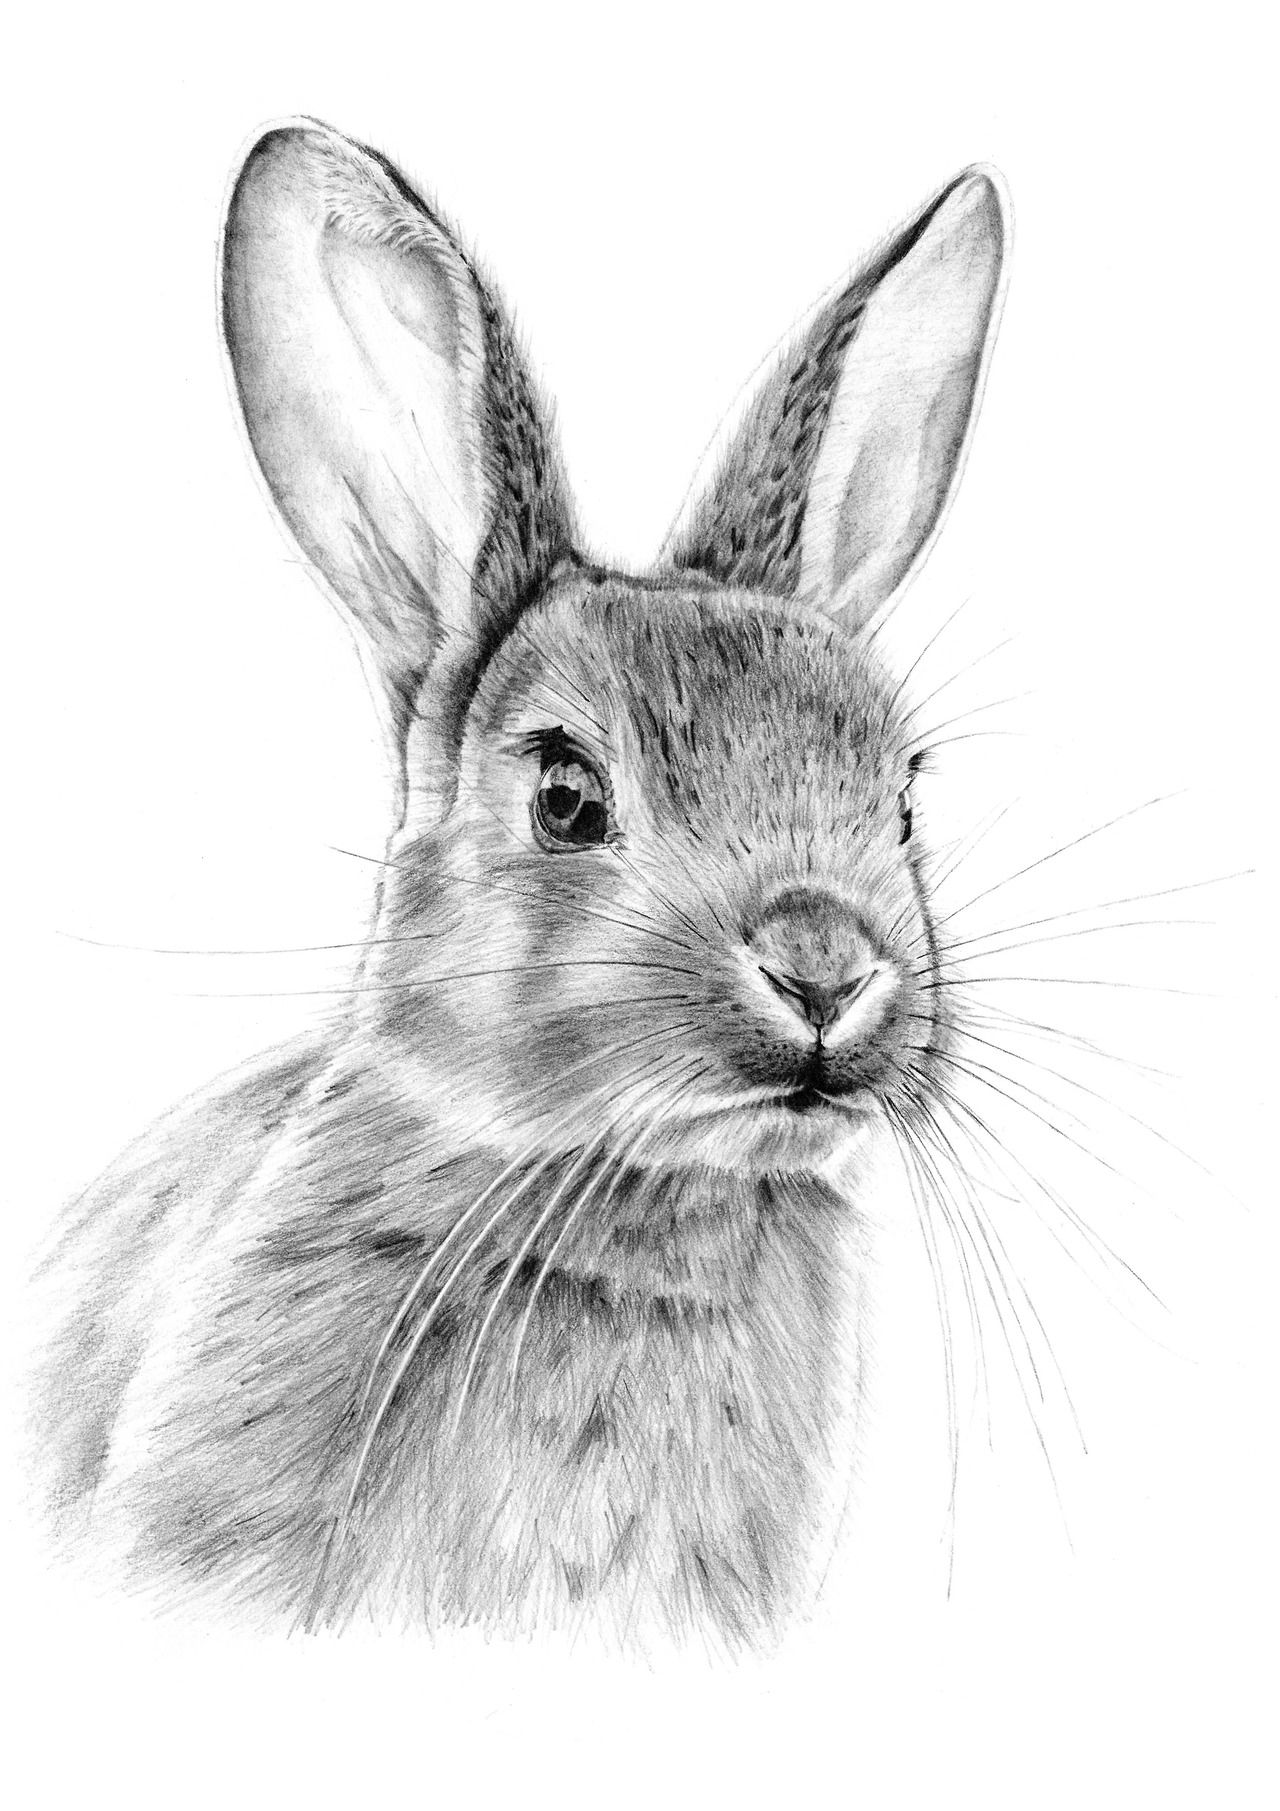 Rabbit Sketch In Pencil at Explore collection of